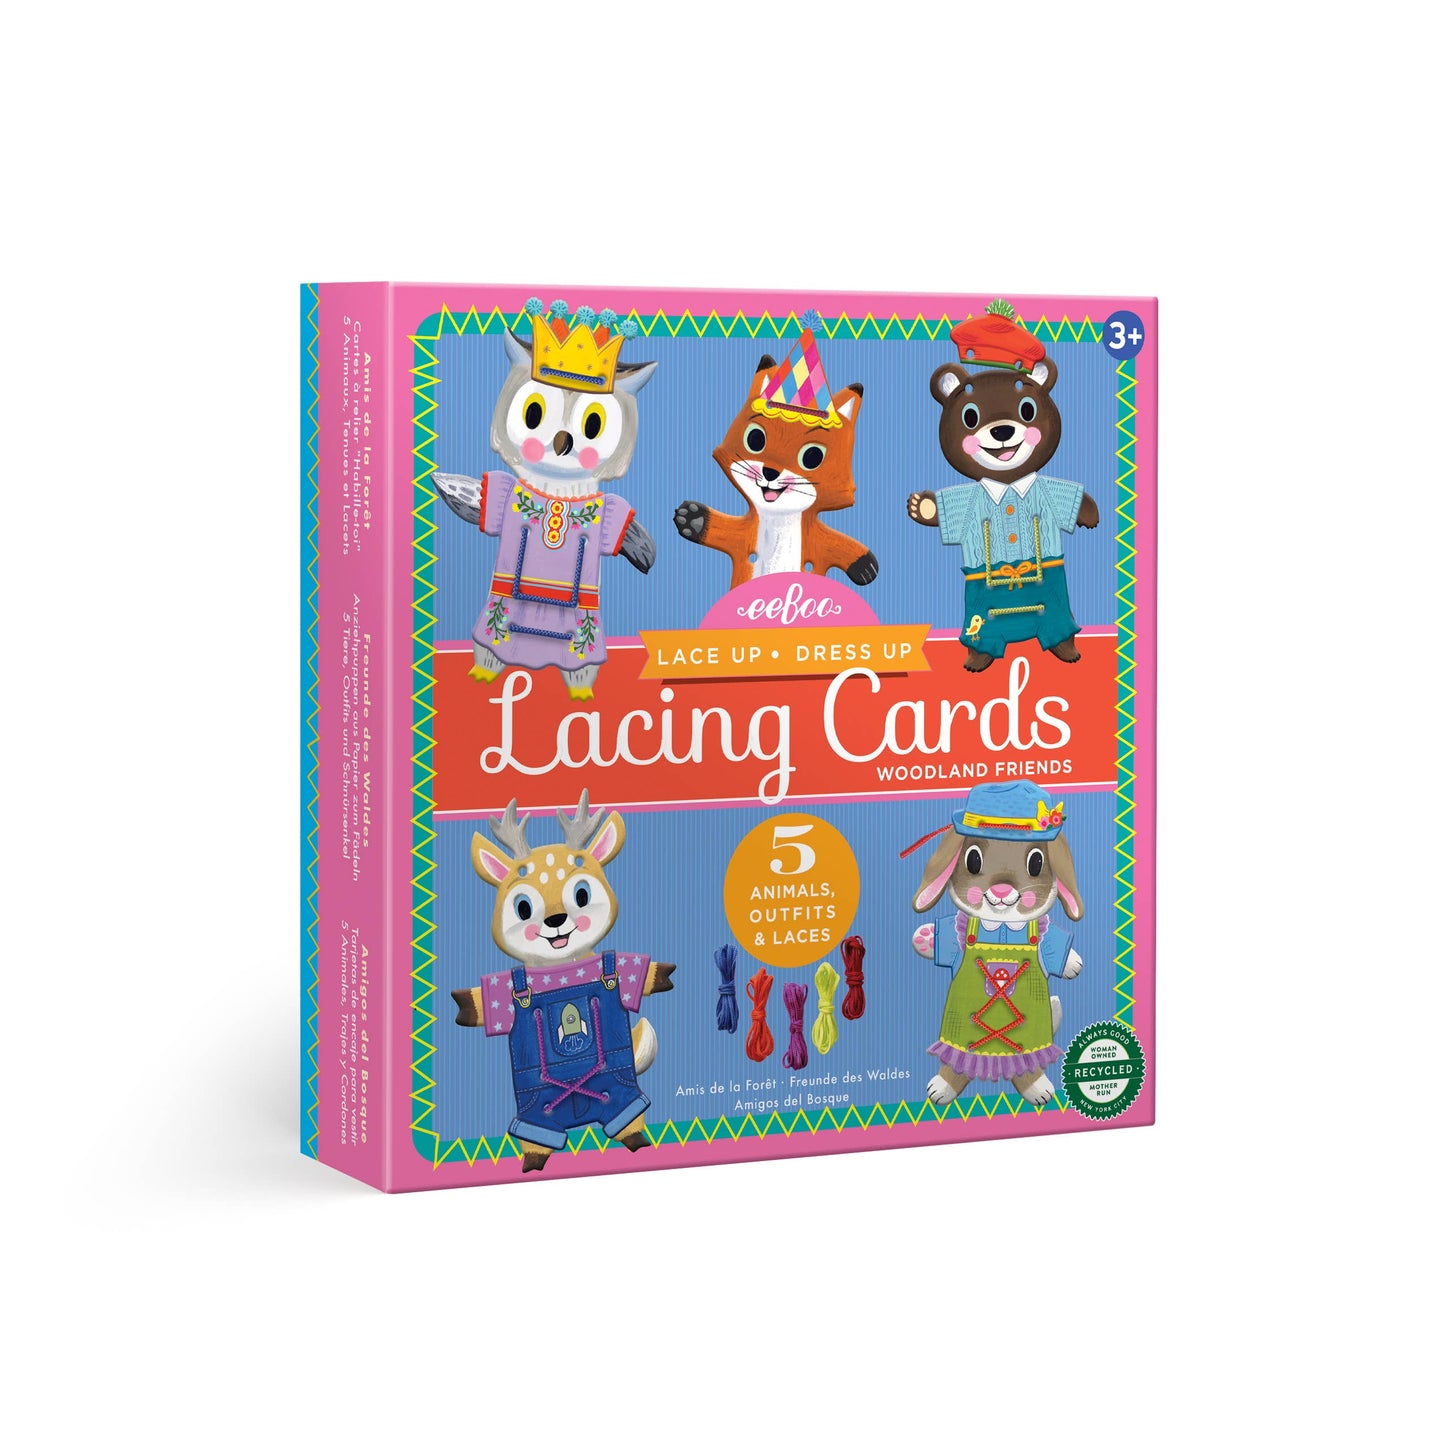 Woodland Friends Dress Up Lacing Card